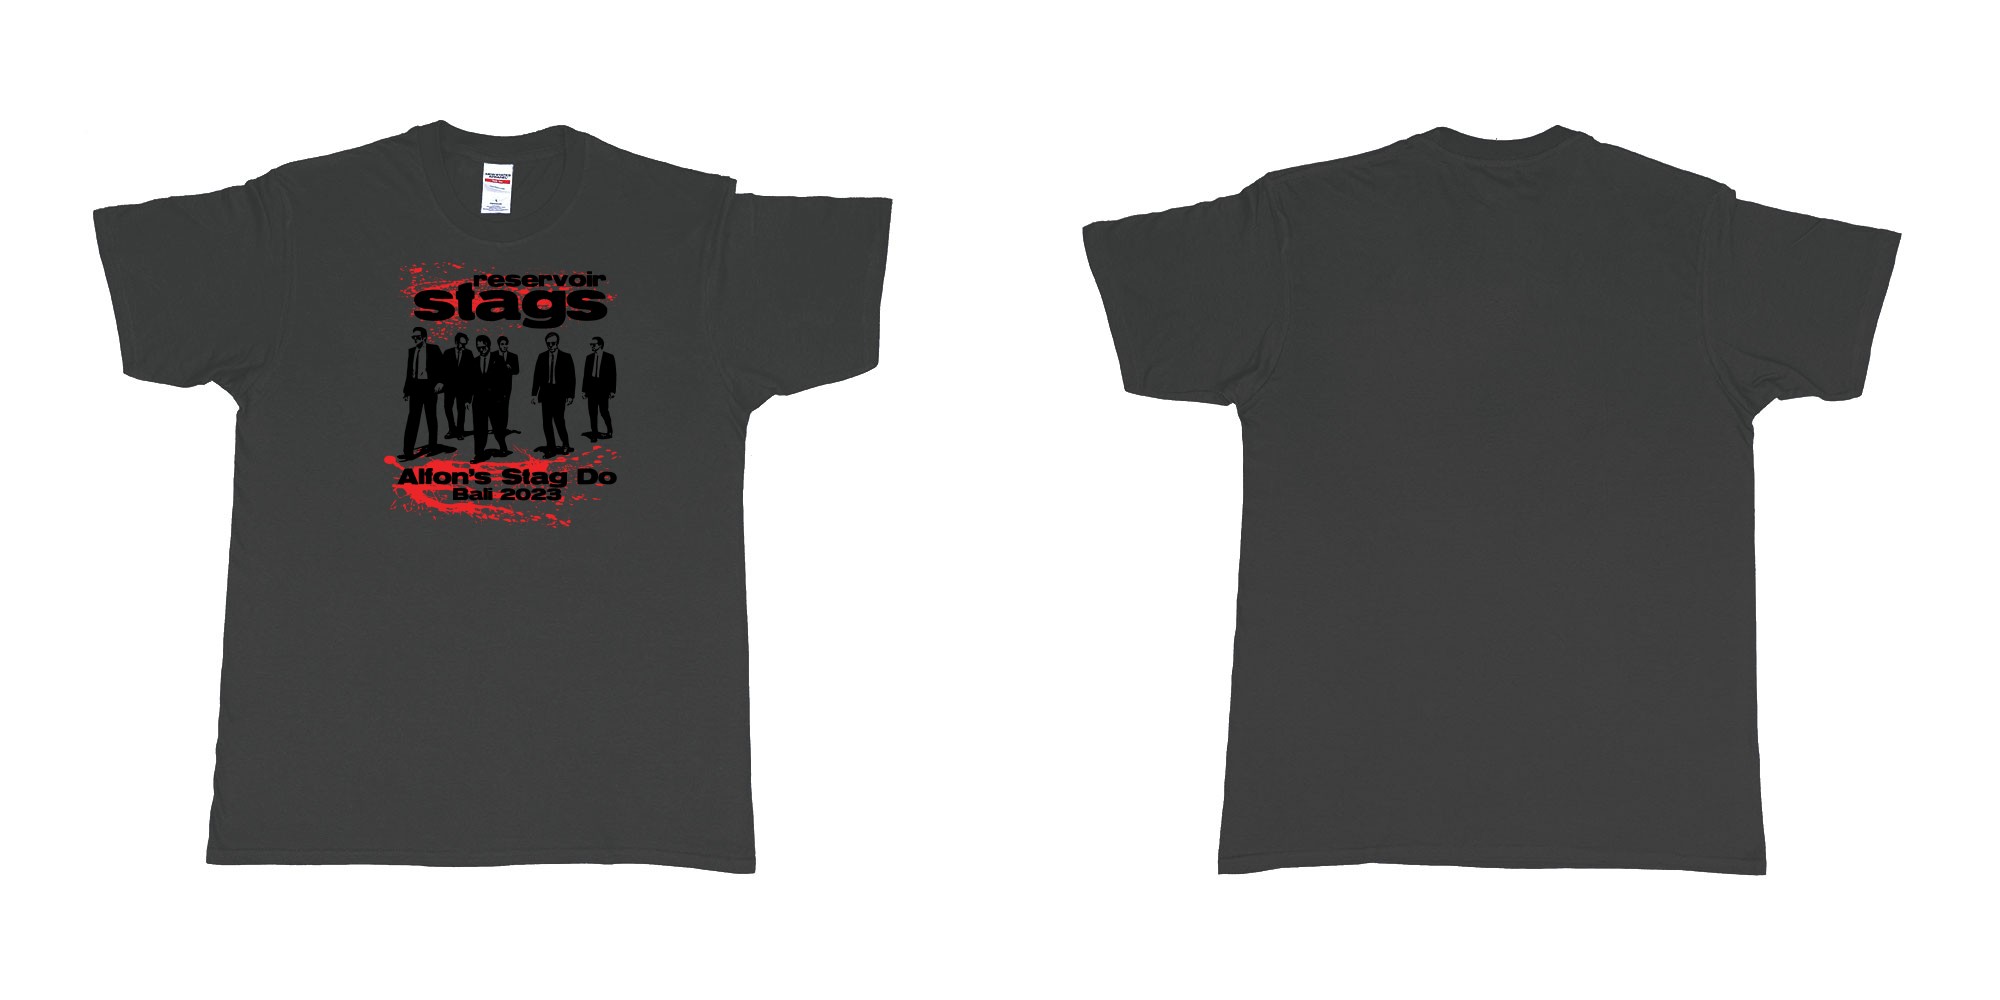 Custom tshirt design Reservoir Dogs Stag in fabric color black choice your own text made in Bali by The Pirate Way